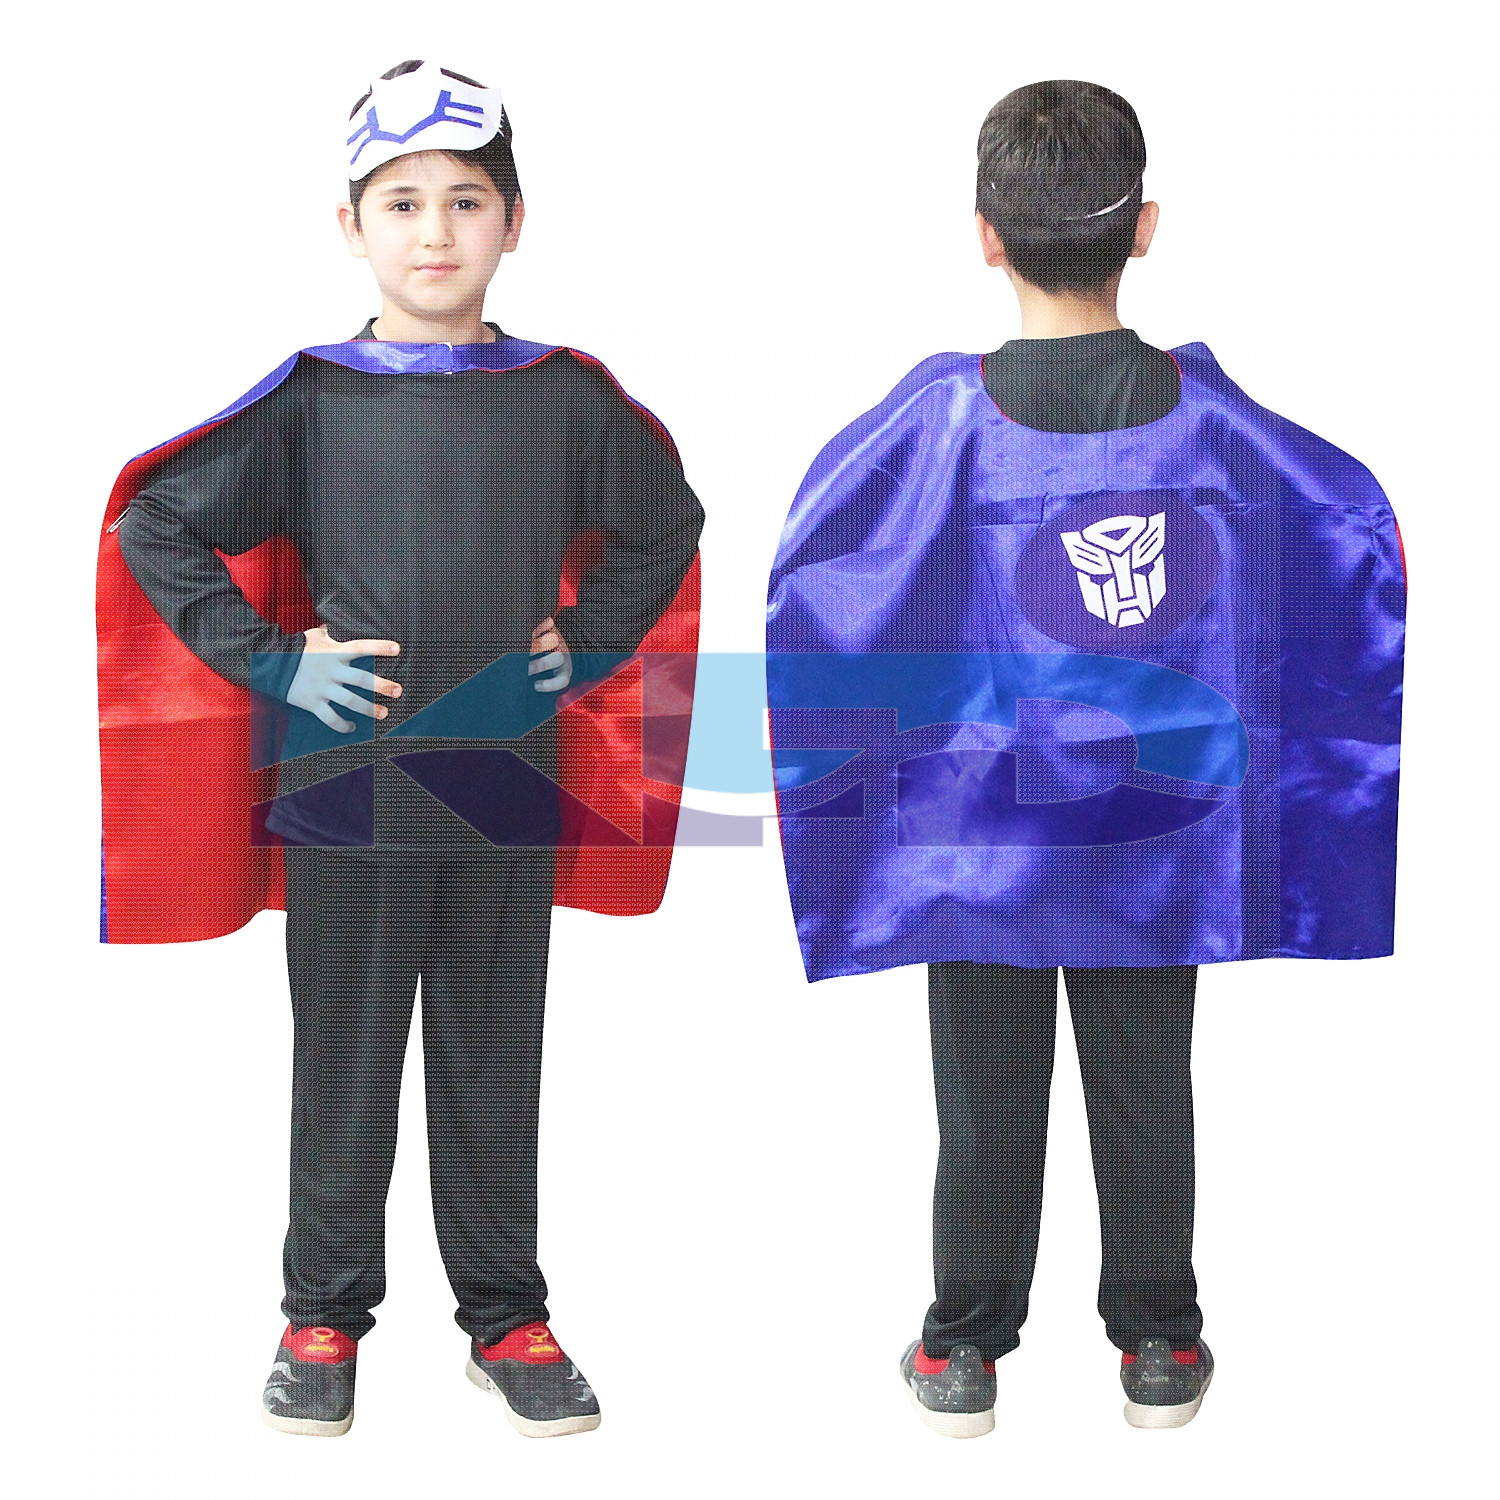 Transformer Robe For Kids/California Costume For kids/Superhero Robe For kids/For Kids Annual function/Theme Party/Competition/Stage Shows/Birthday Party Dress